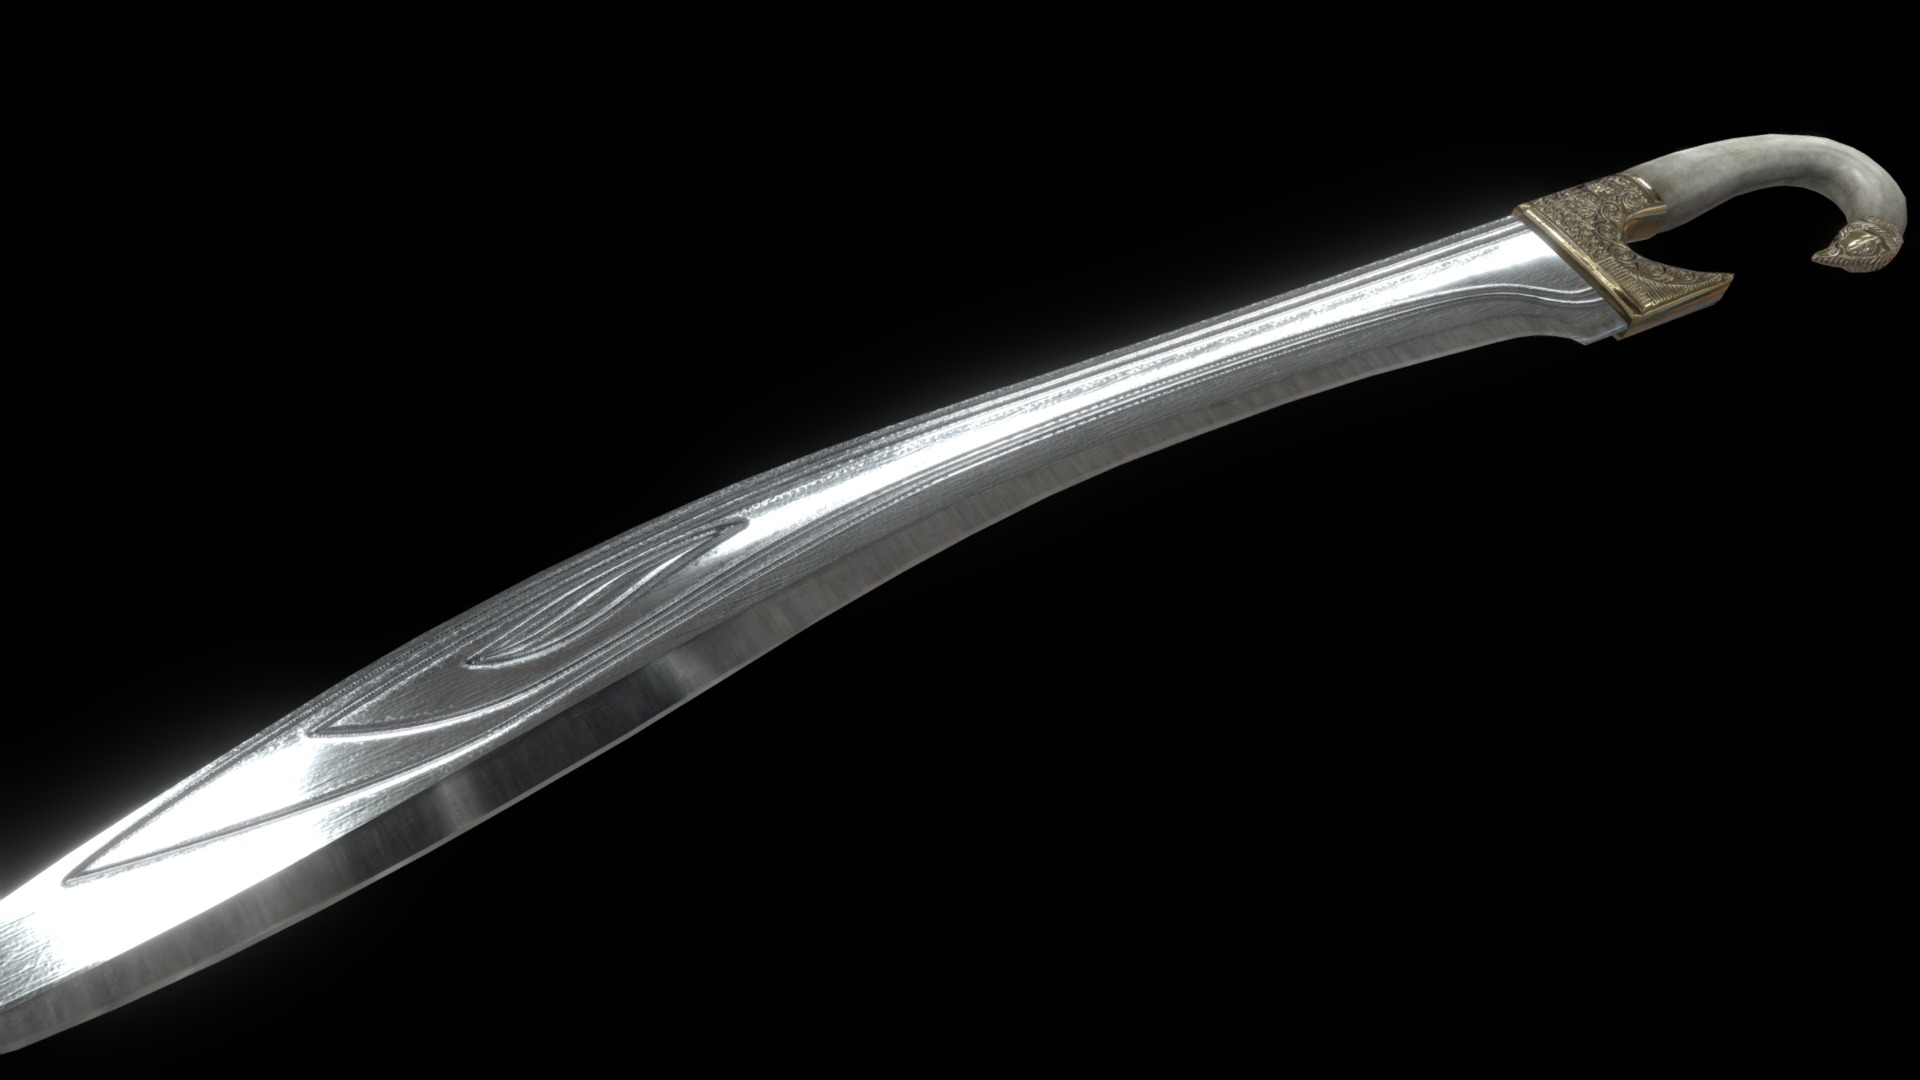 3D model Khopis - This is a 3D model of the Khopis. The 3D model is about a sword with a long handle.